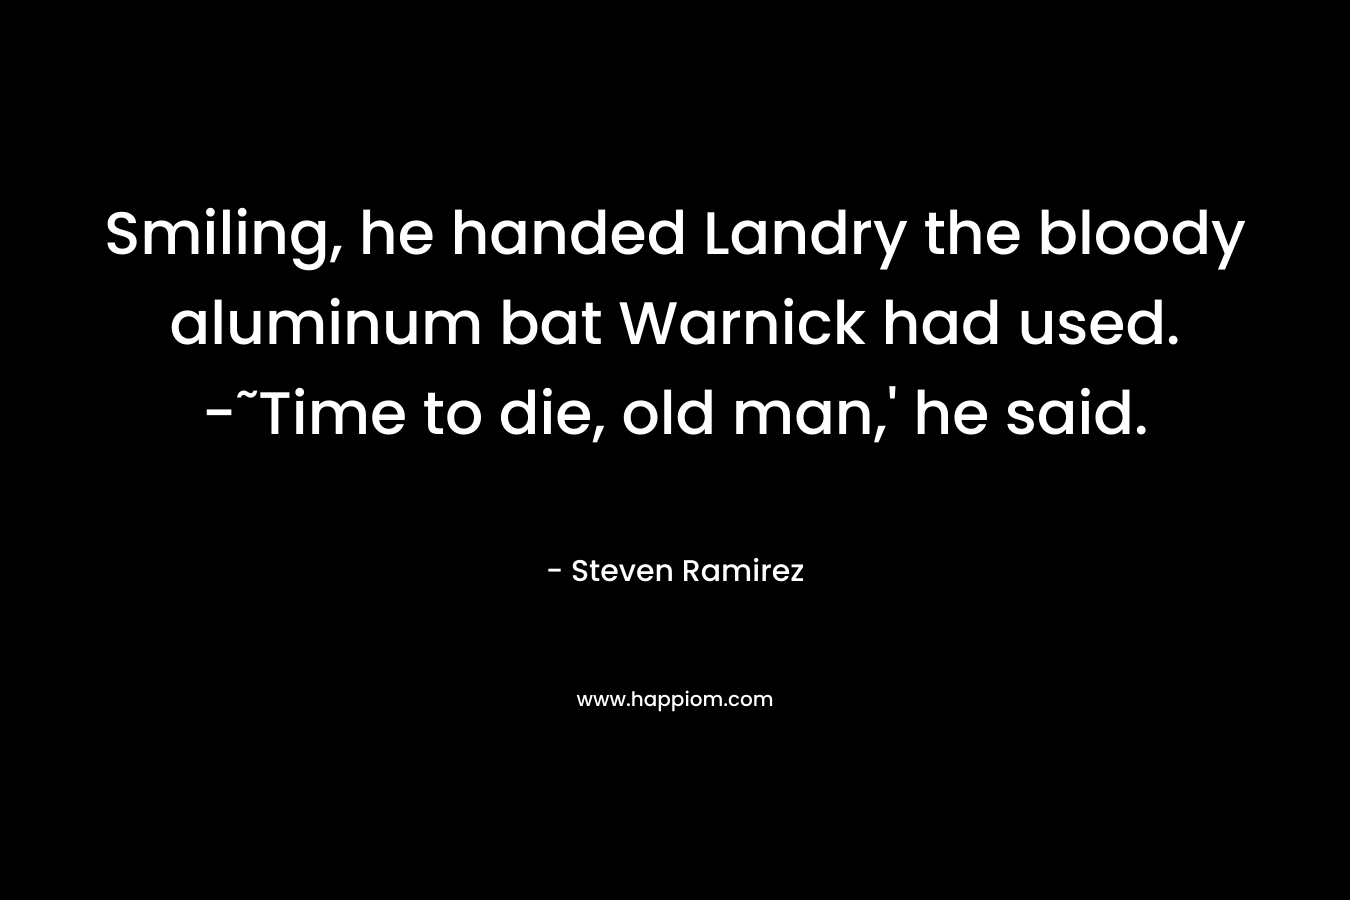 Smiling, he handed Landry the bloody aluminum bat Warnick had used. -˜Time to die, old man,’ he said. – Steven Ramirez